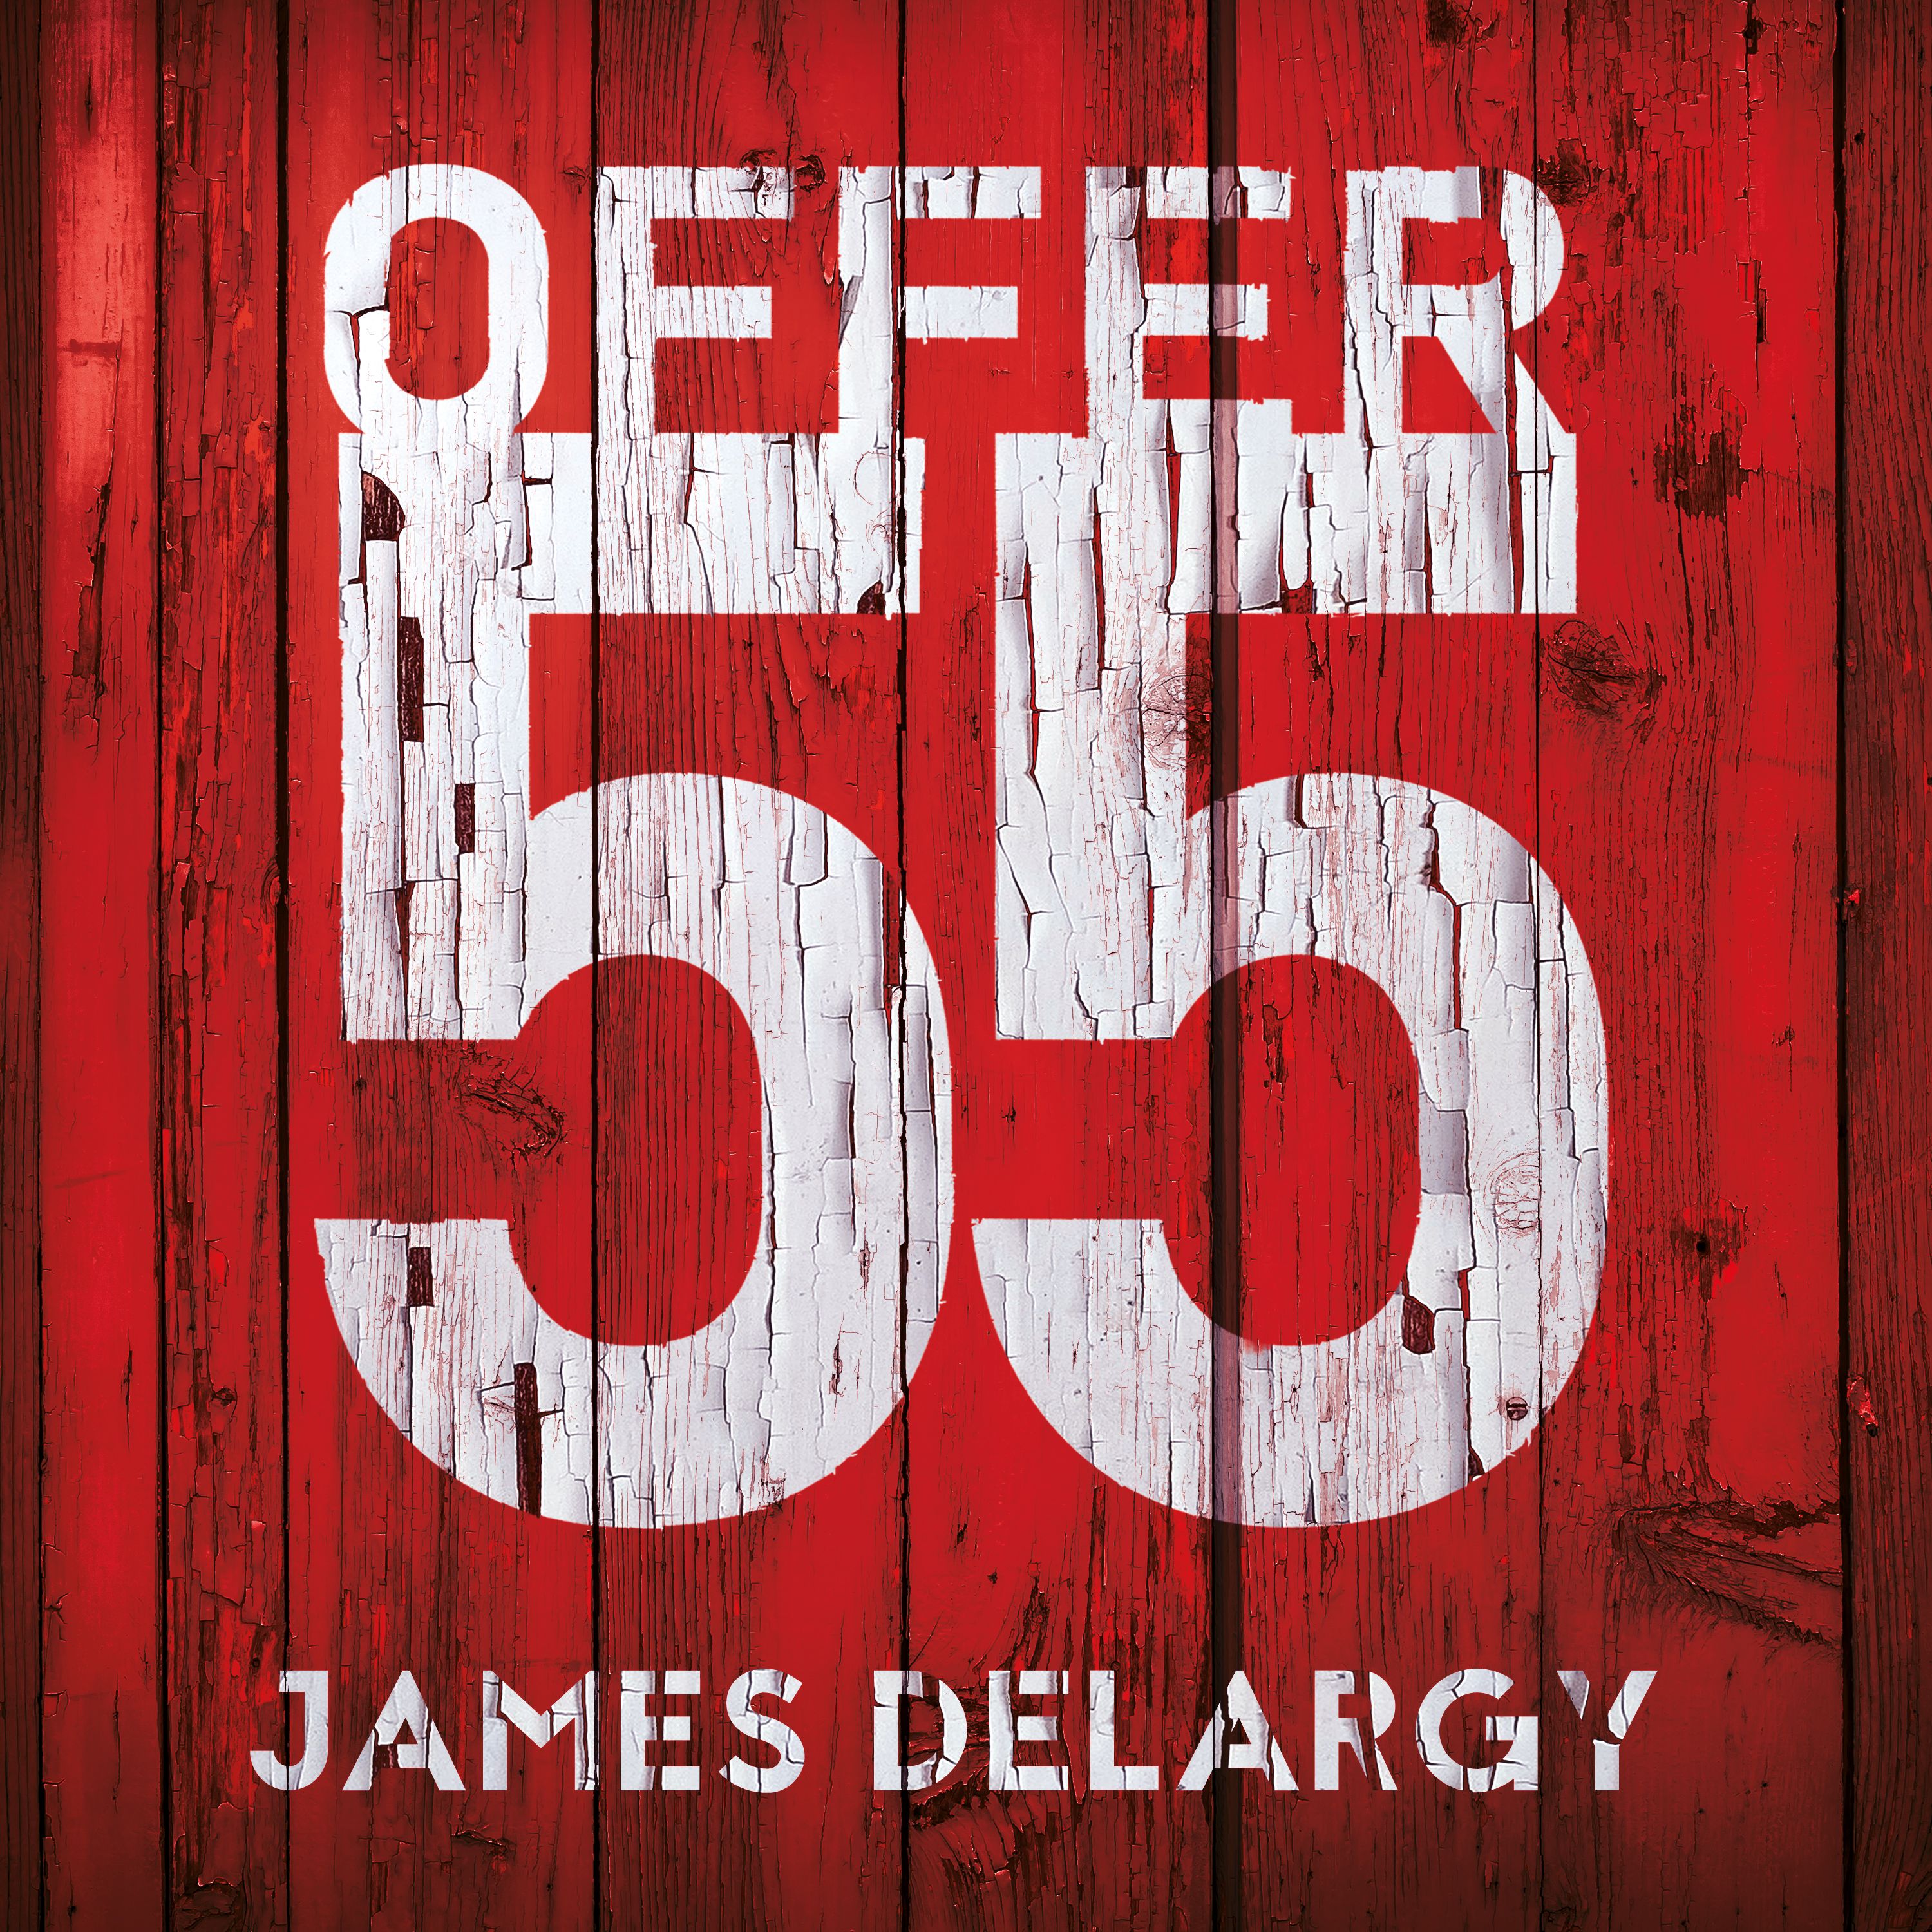 Offer 55, audiobook by James Delargy